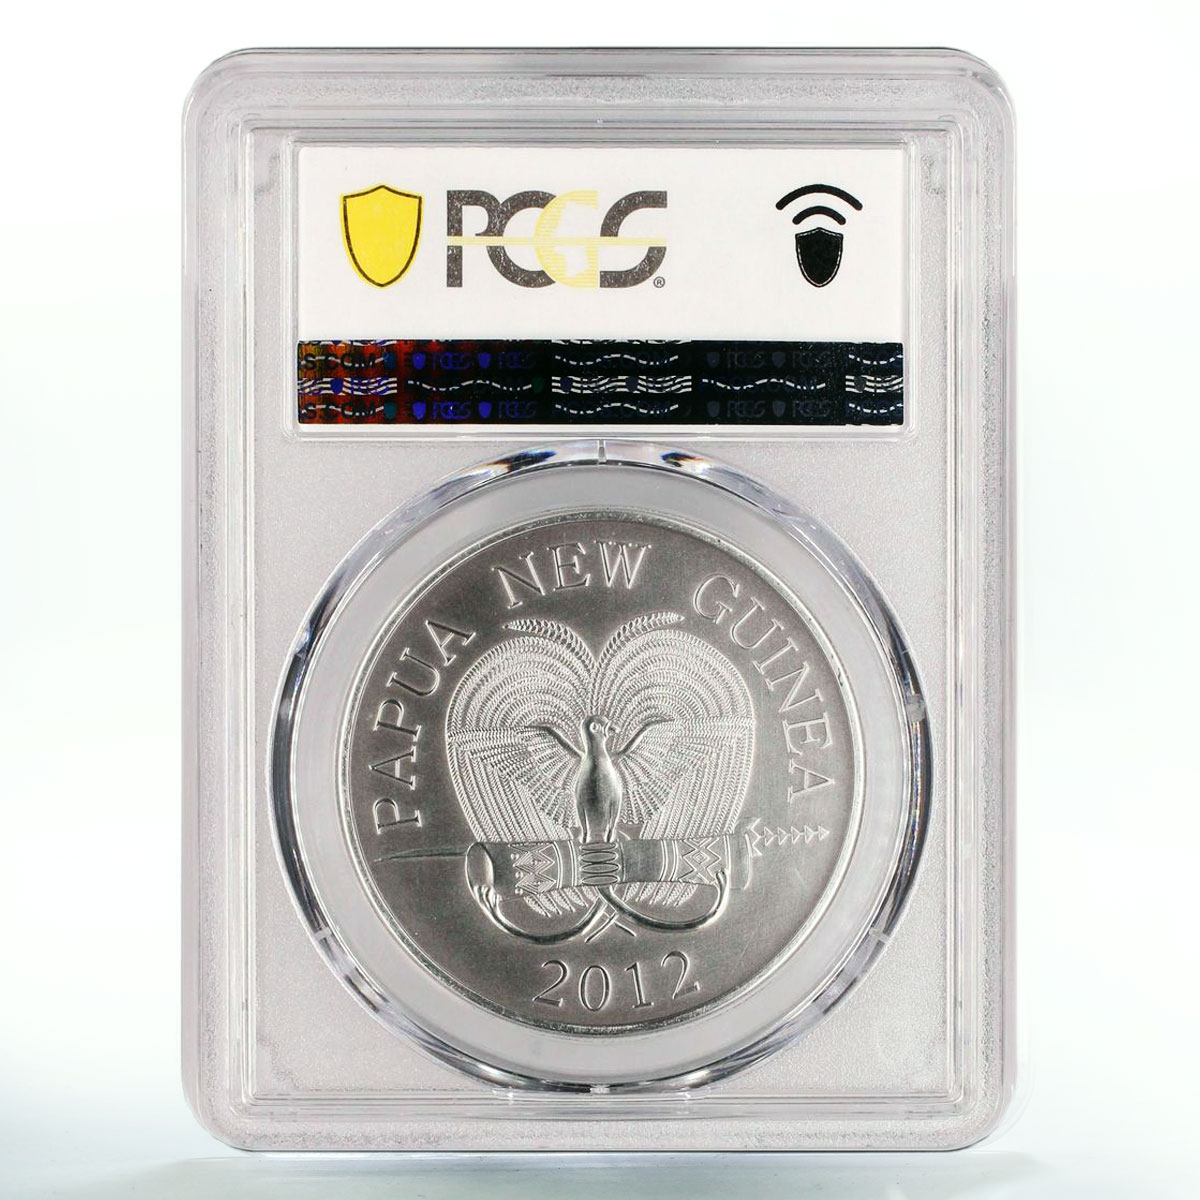 Papua New Guinea 5 kina Endangered Wildlife Anteater MS70 PCGS silver coin 2012